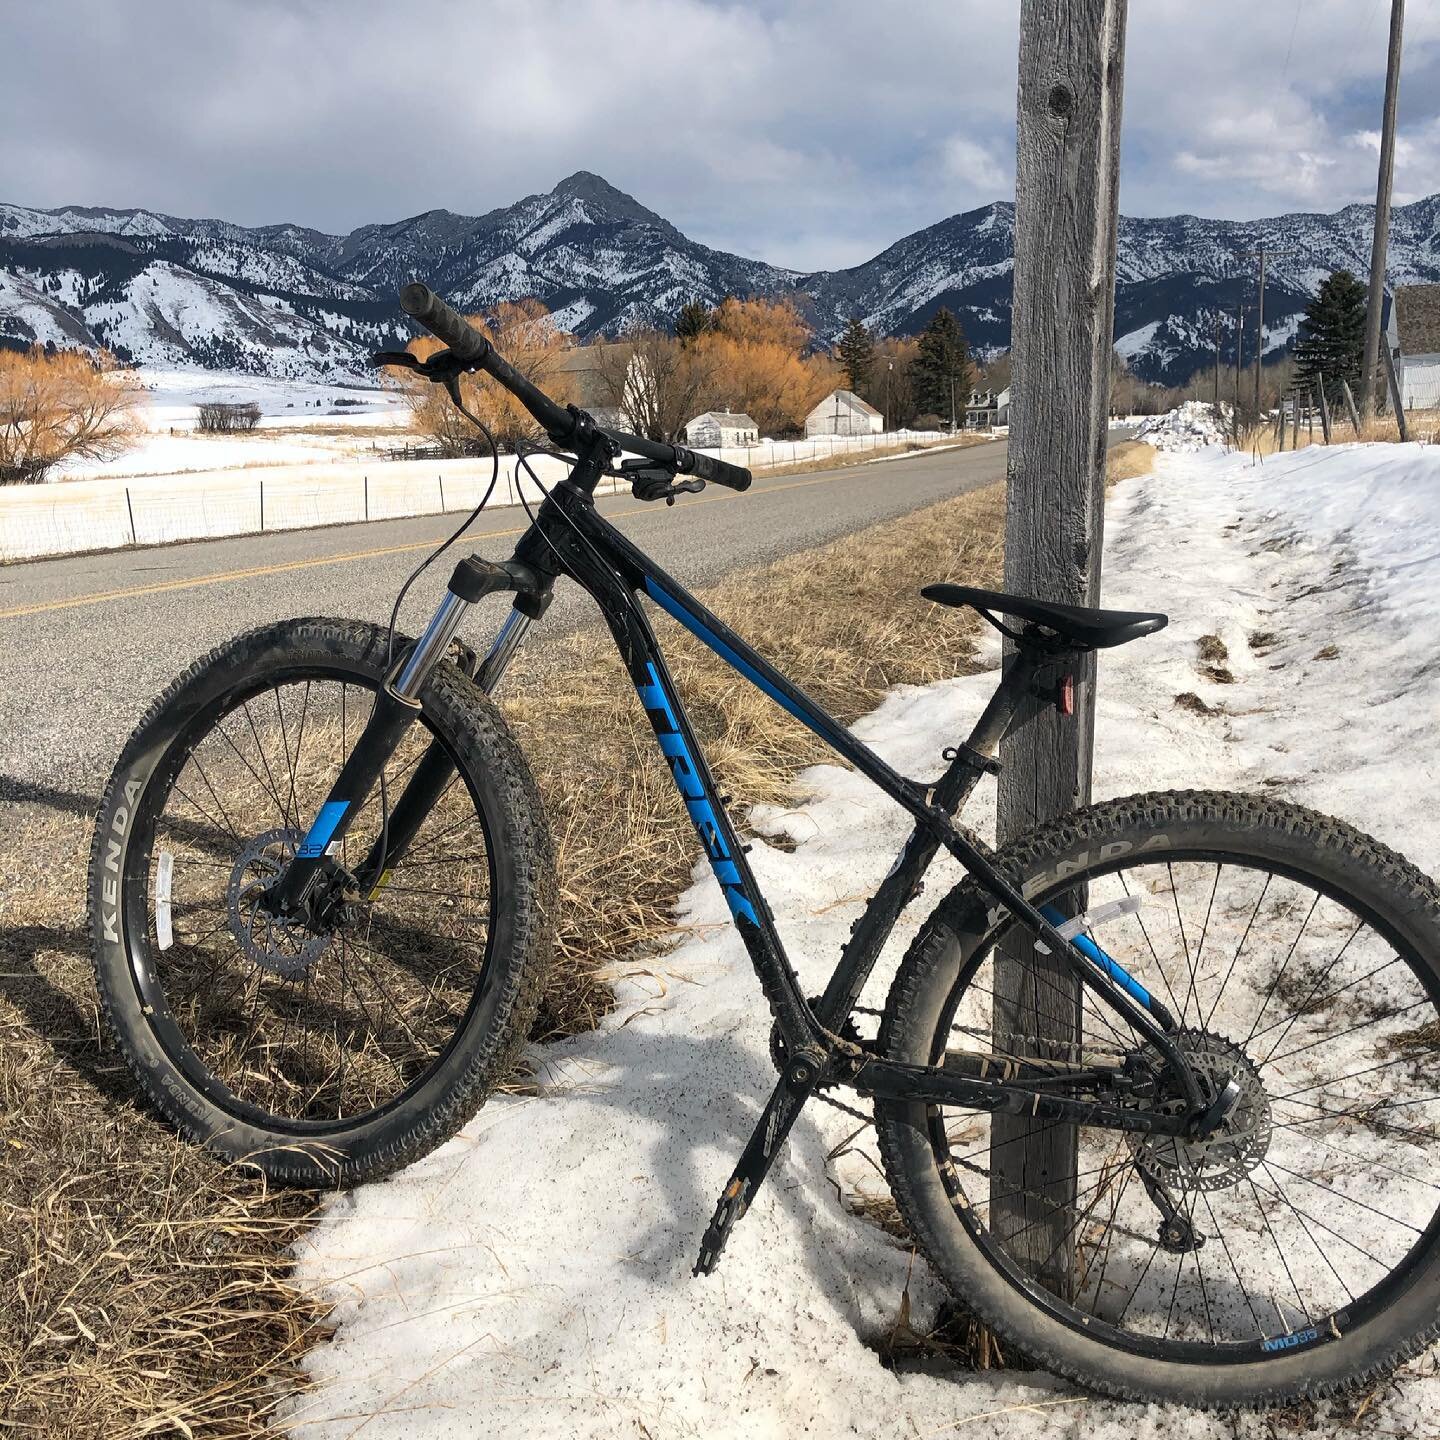 🤠 First ride of the year in the books. Rode down some roads nearby, but ready to get back out on the trail 🔜 
.
.
.
#mtb #trails #trek #trekbikes #mt #montana #bike #biking #mountains #spring #almostspring #waitingforspring #snowmelt #meltingsnow #